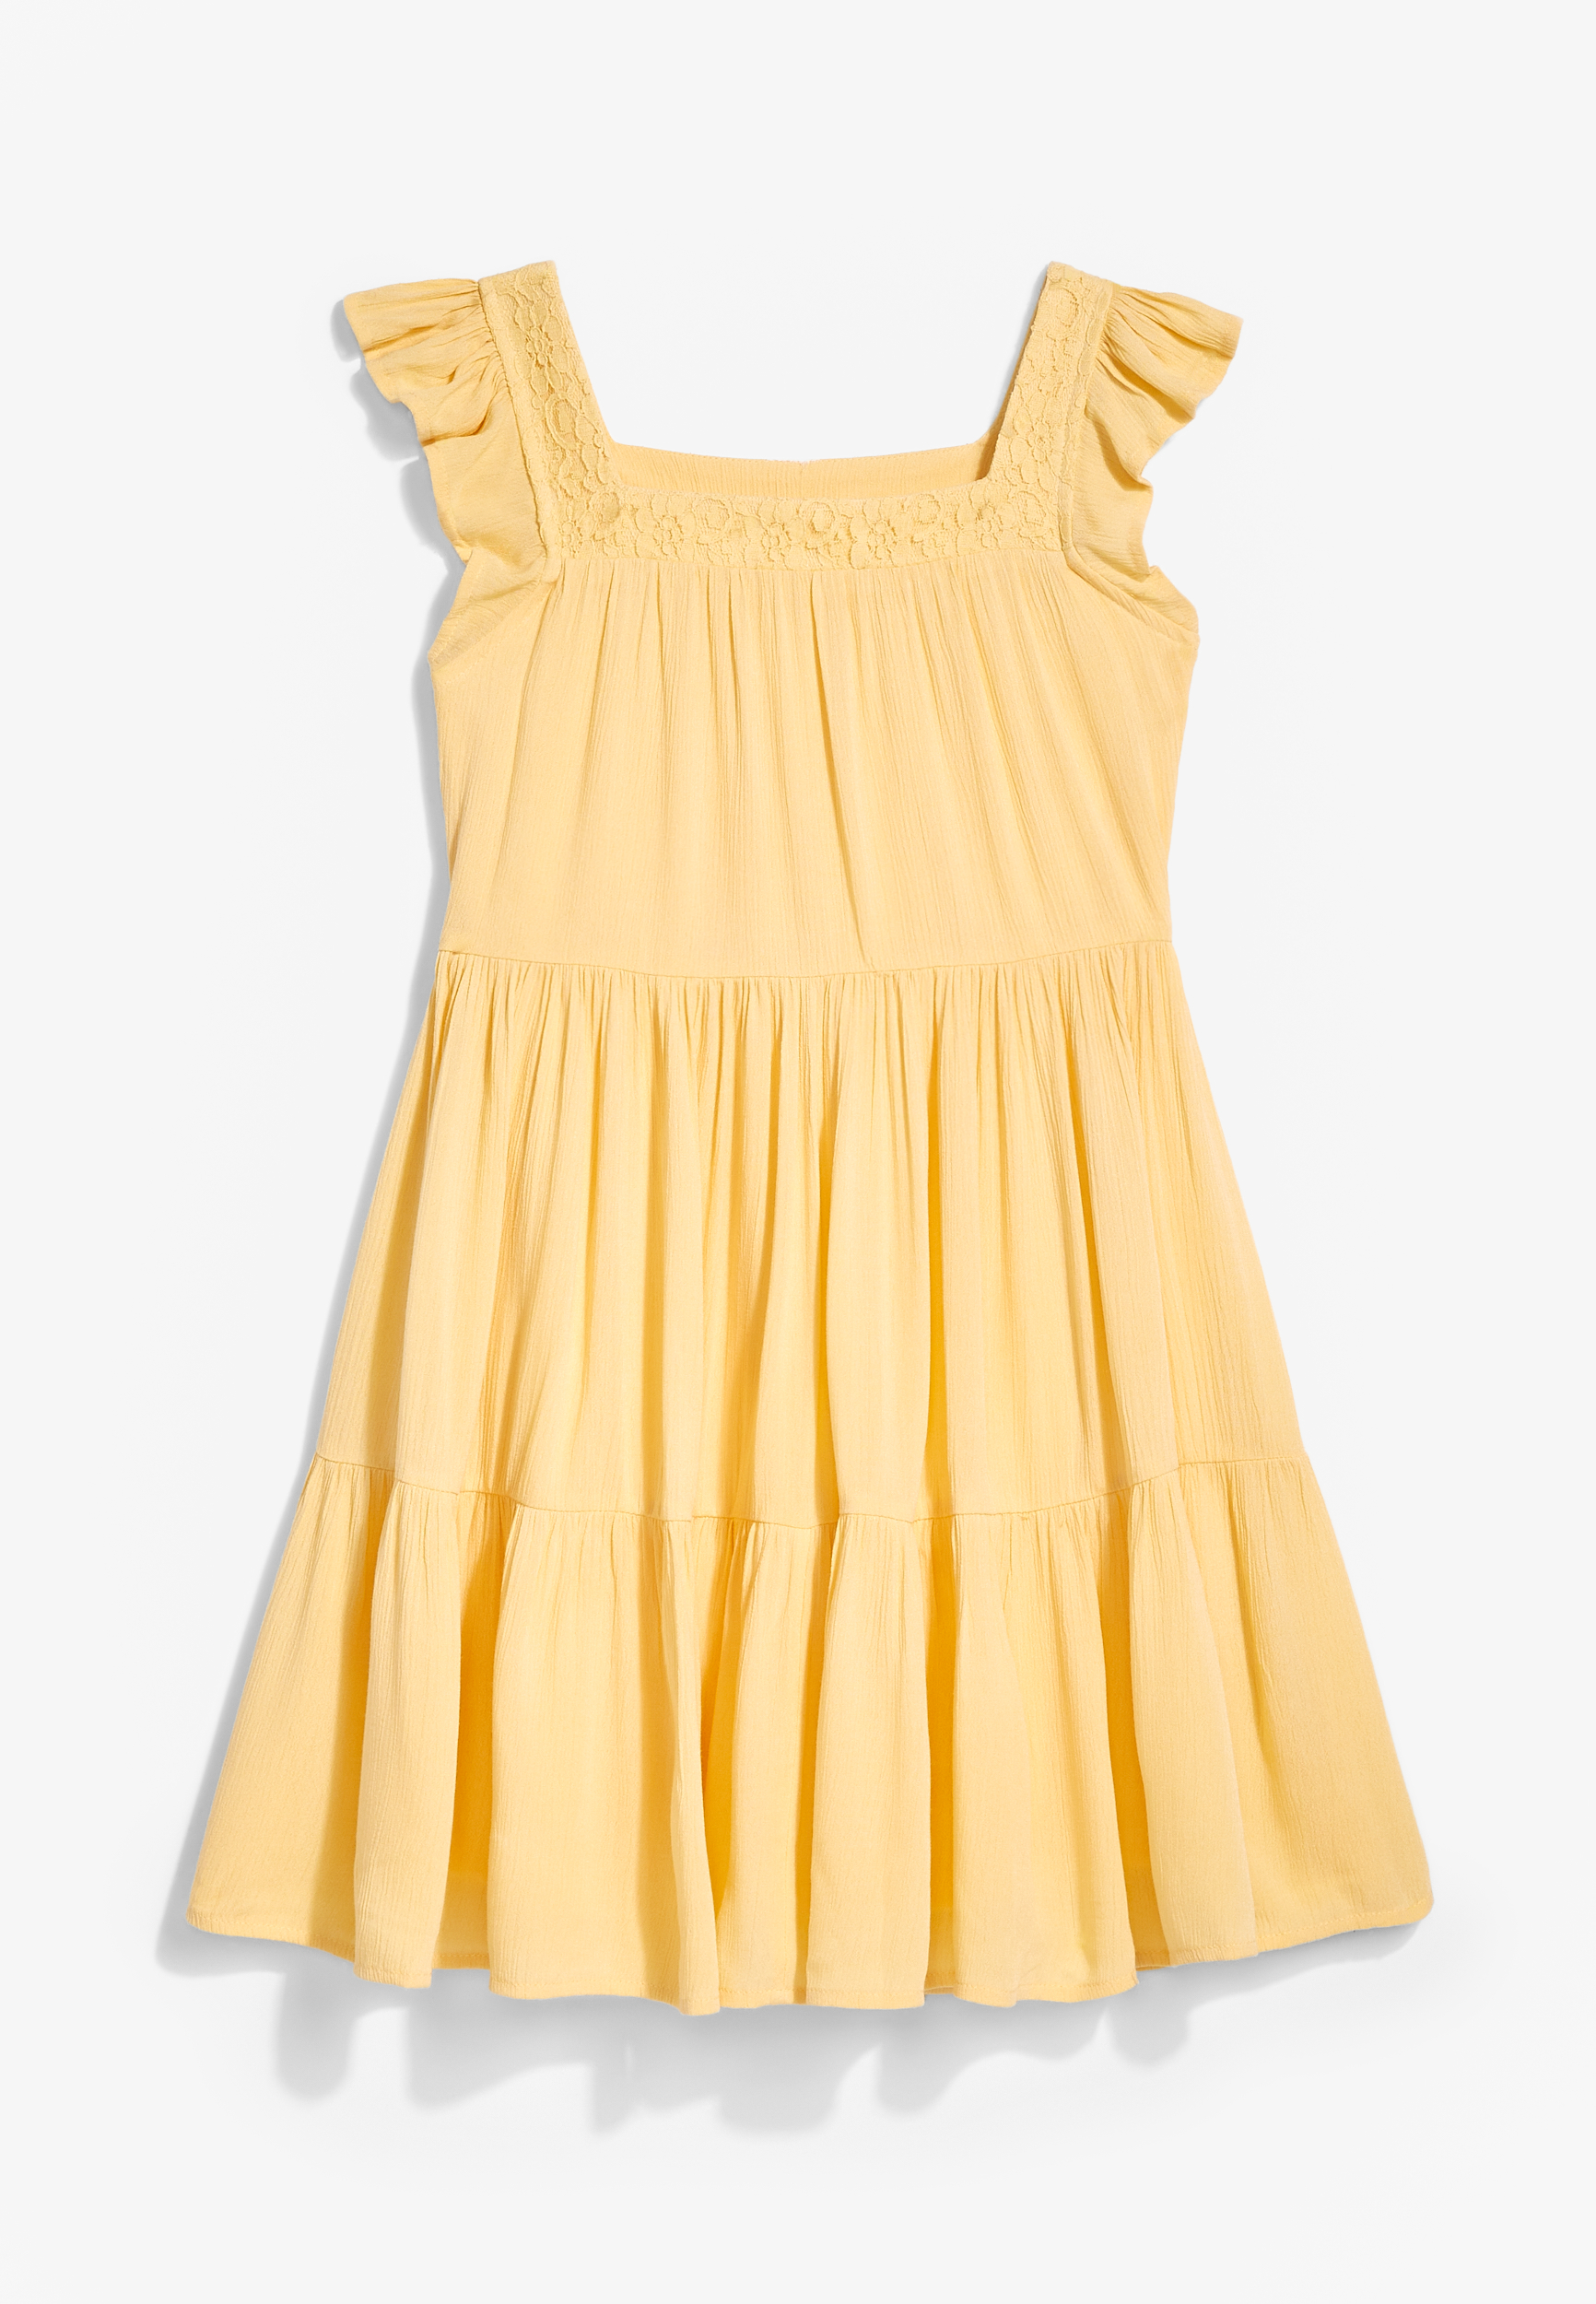 Girls Lace Trim Dress | maurices